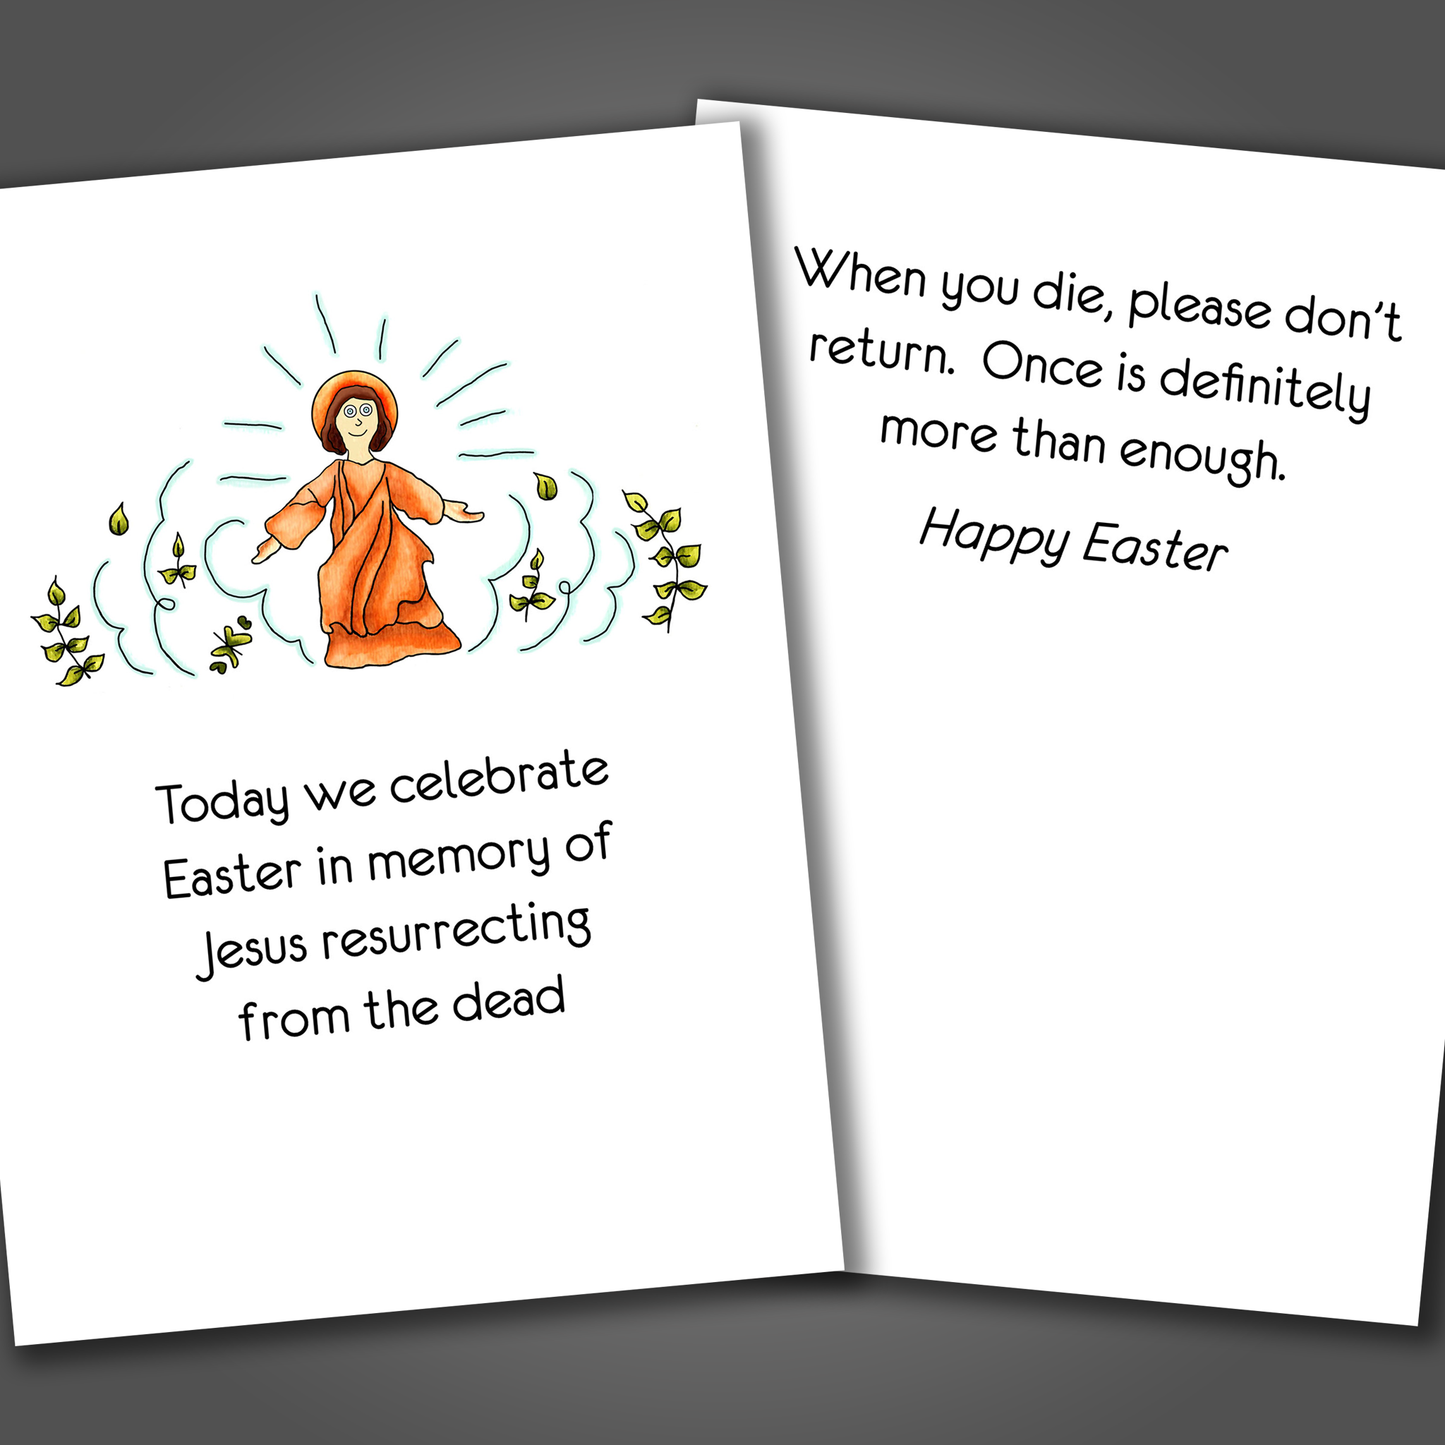 Funny Happy Easter Card with a drawing of Jesus on the front of the card. Inside the card is a funny joke that says when you die, please don't return, once is enough!